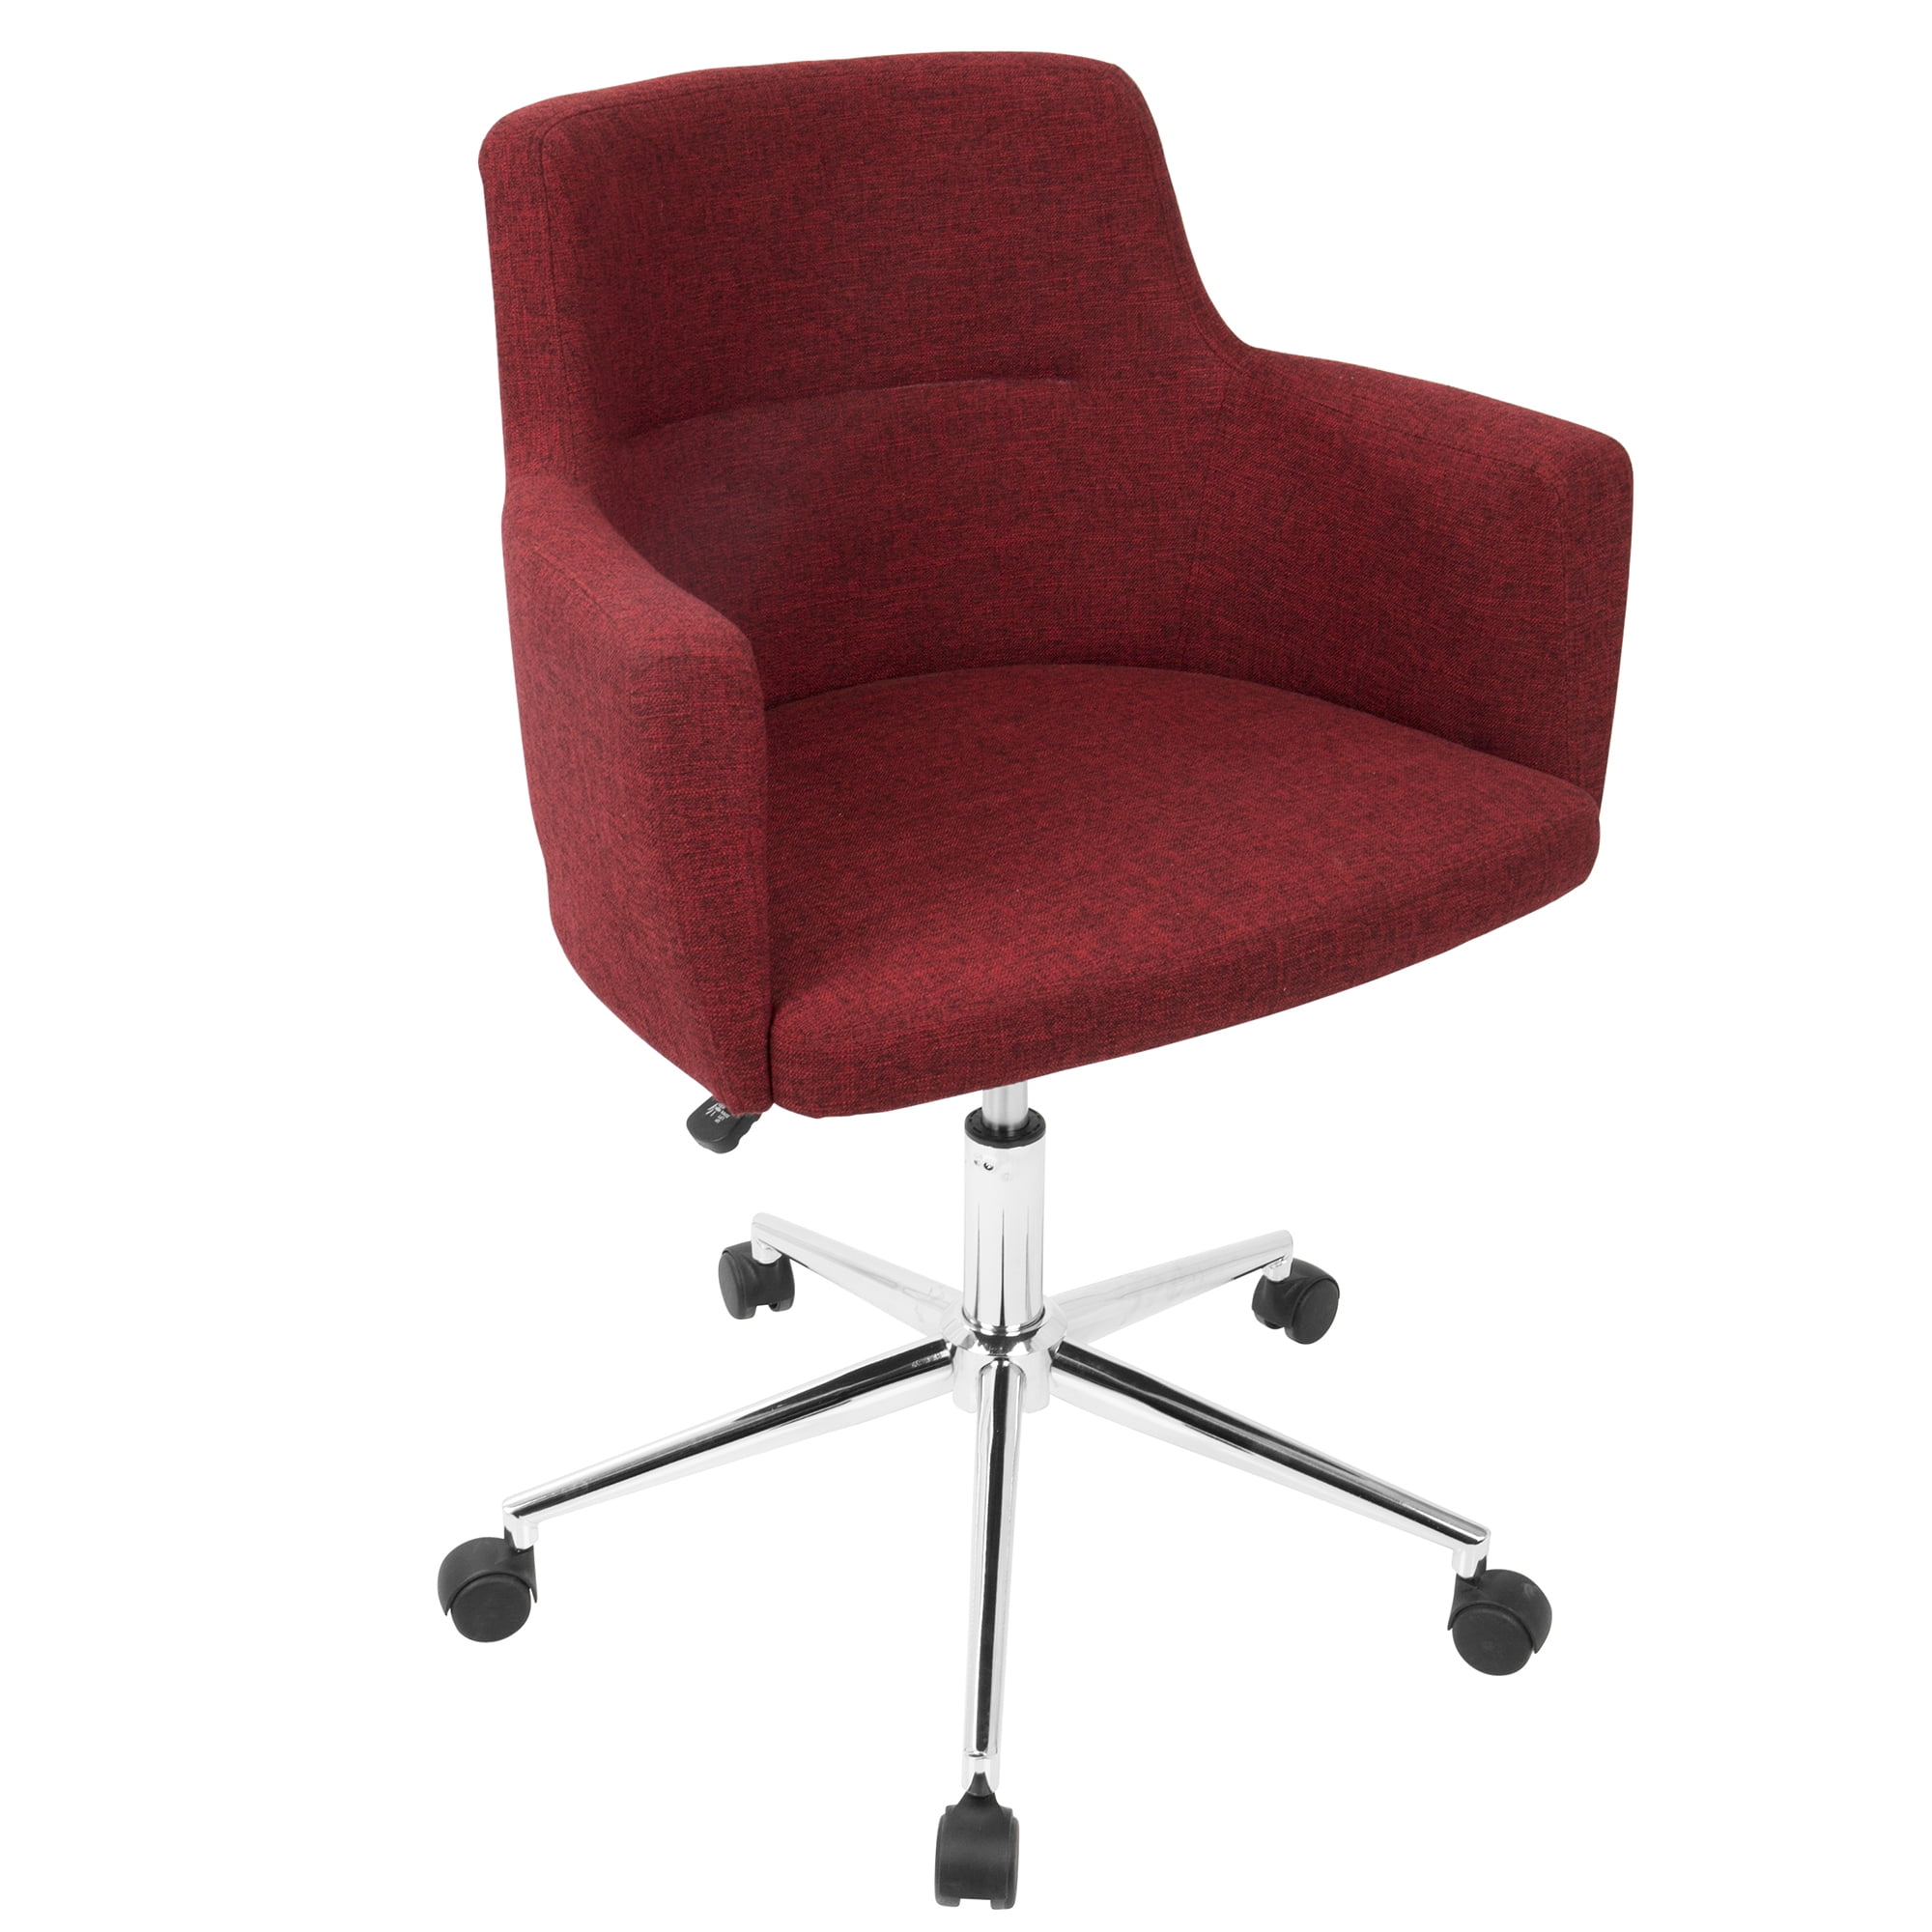 Lumisource Andrew Office Chair, Red - OC-ANDRWR - Walmart.com